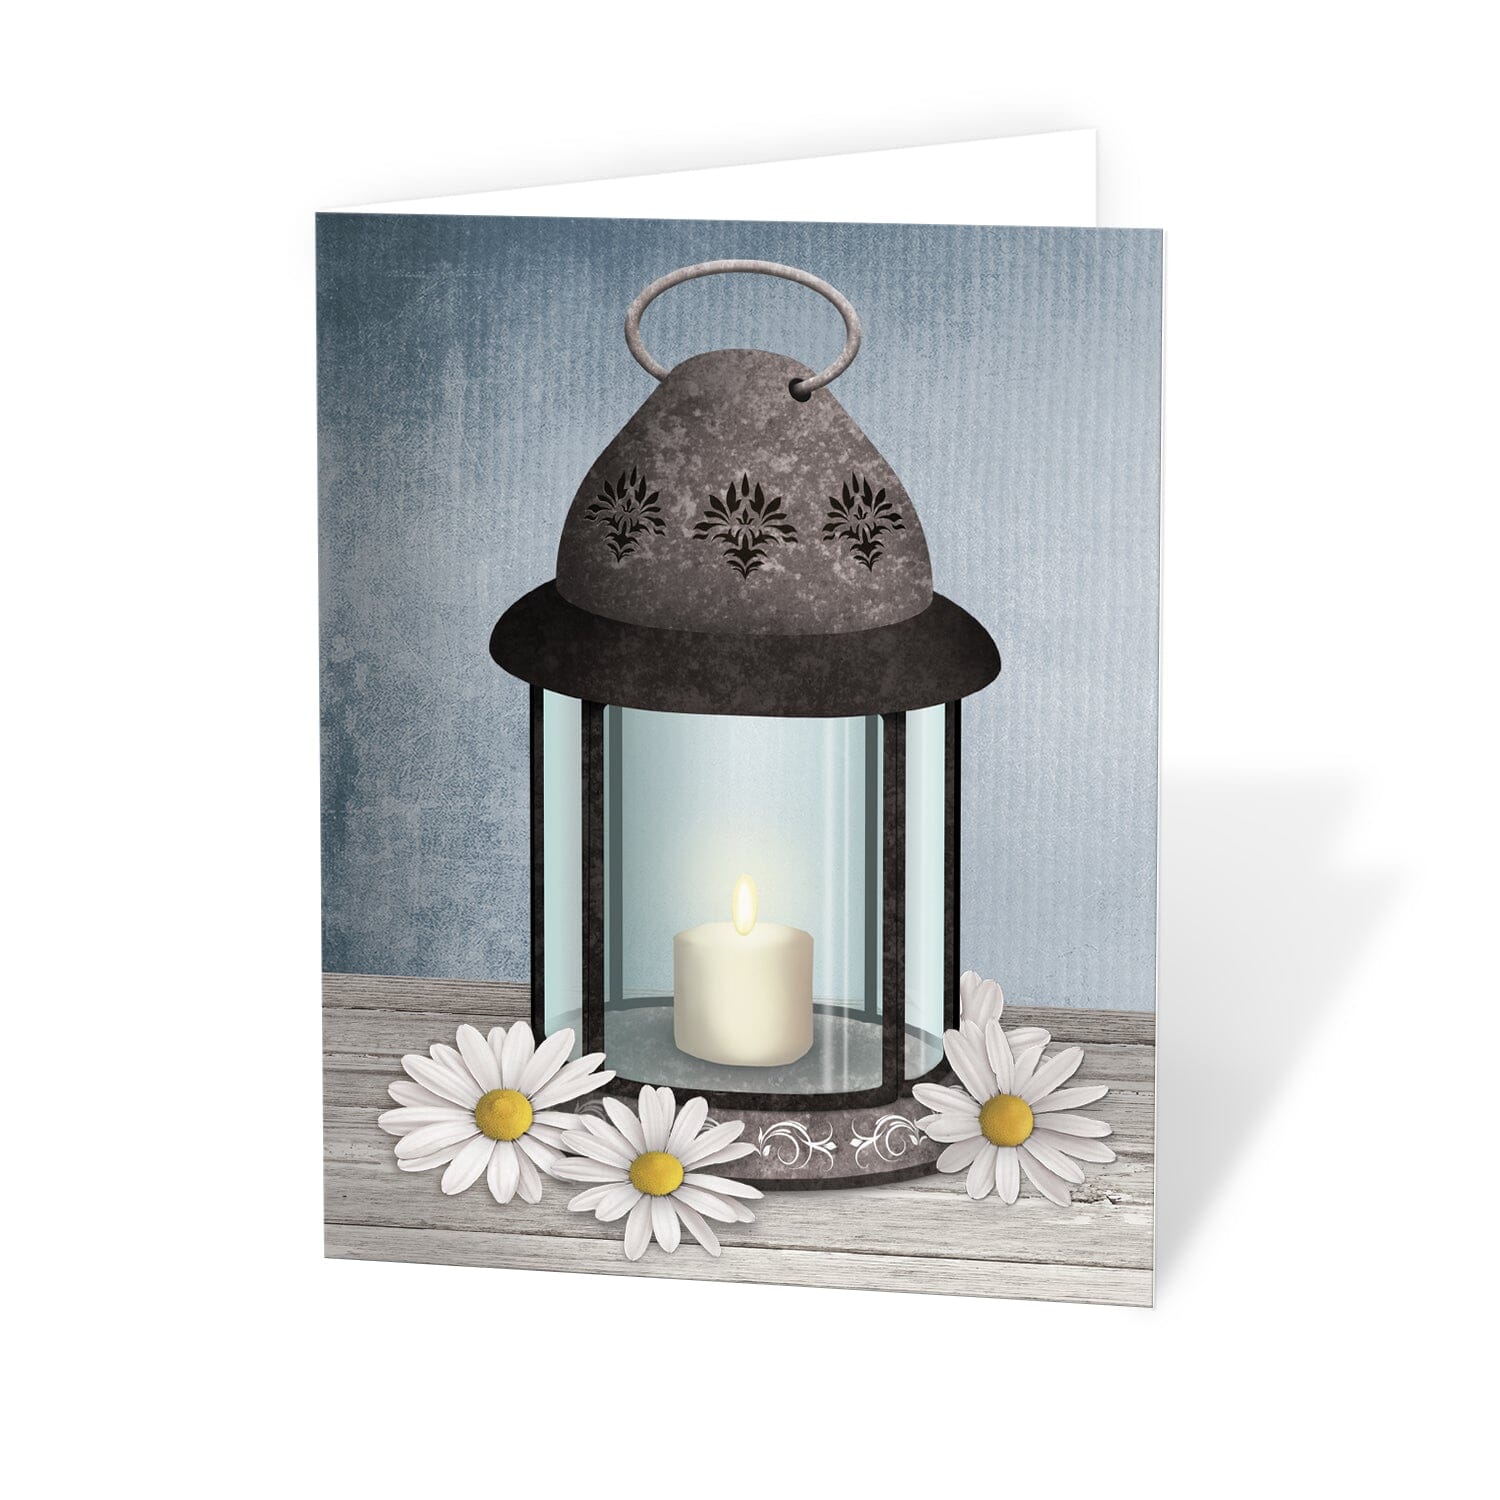 Rustic Lantern Daisy Note Cards at Artistically Invited.